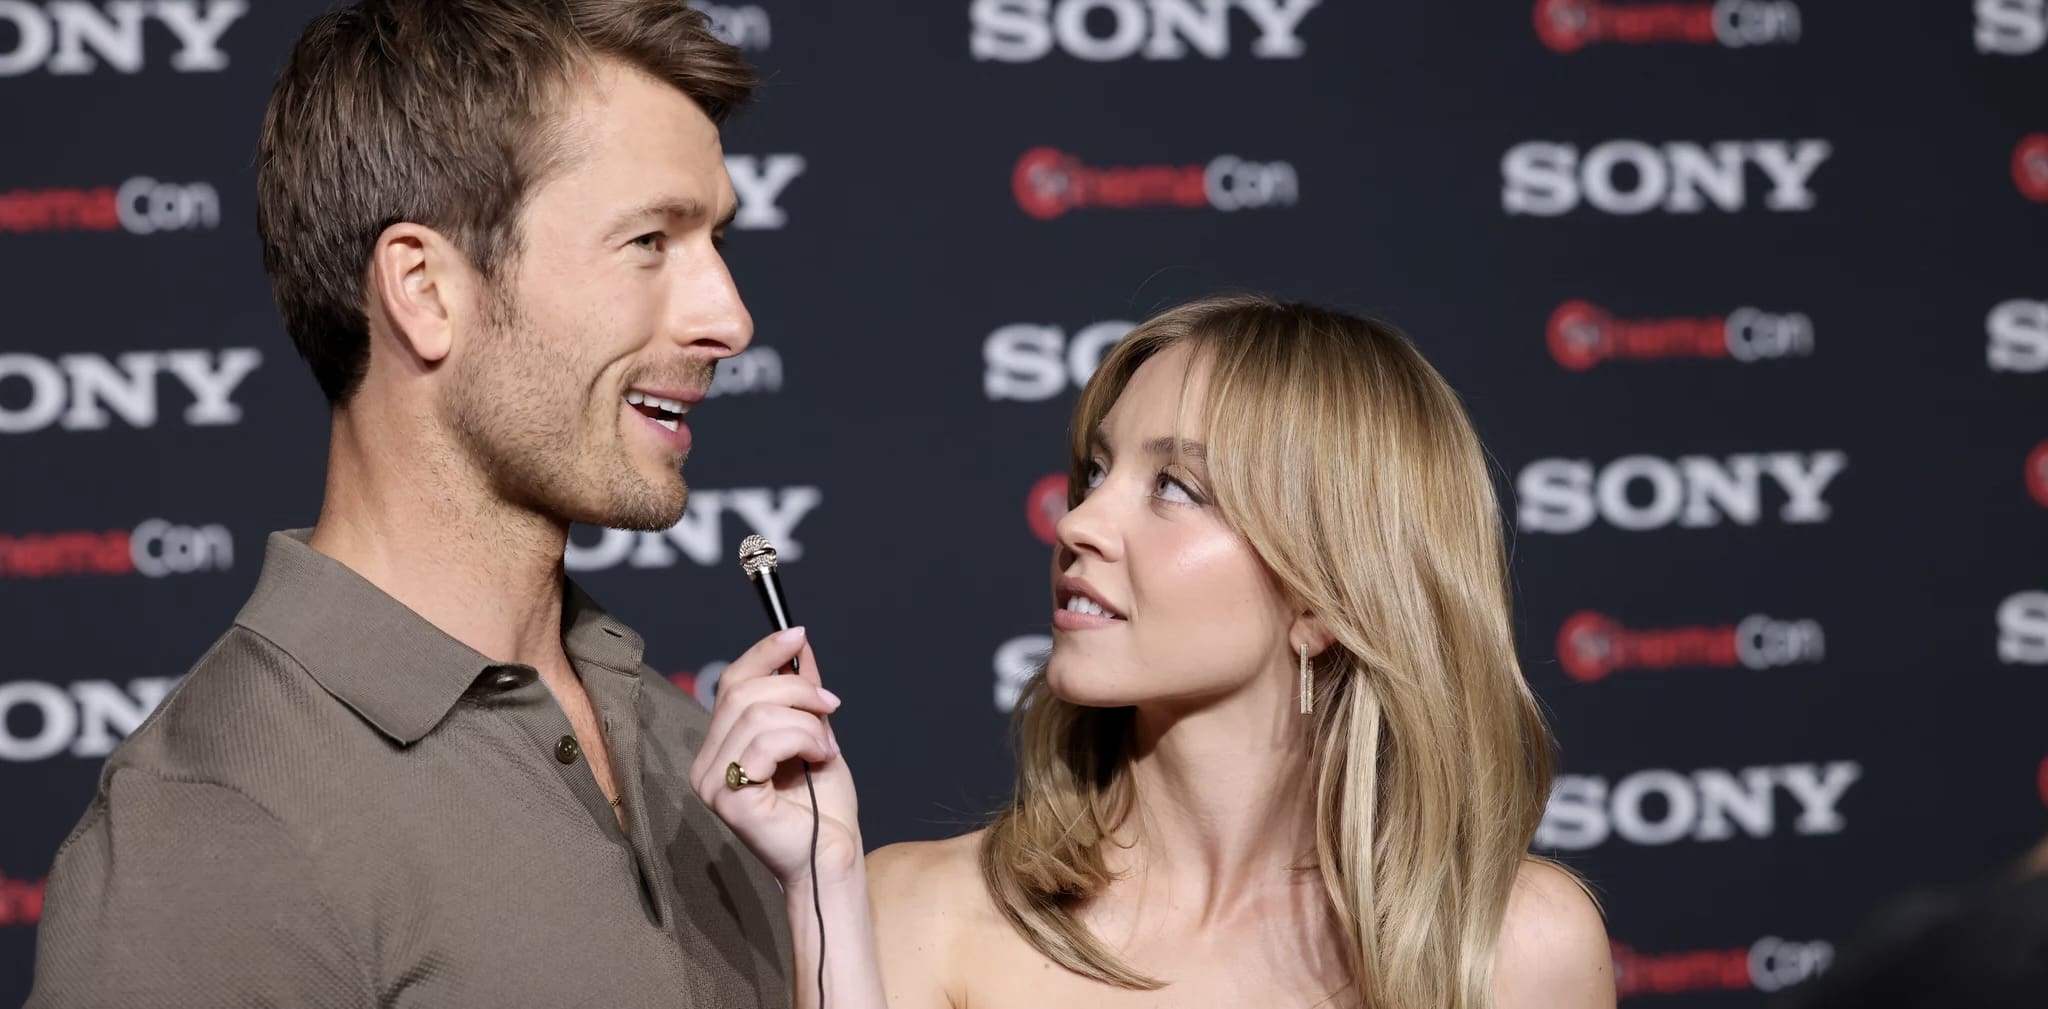 The Drama Surrounding Sydney Sweeney And Glen Powell (And Glen Powell’s Girlfriend) Has Grown Even Messier